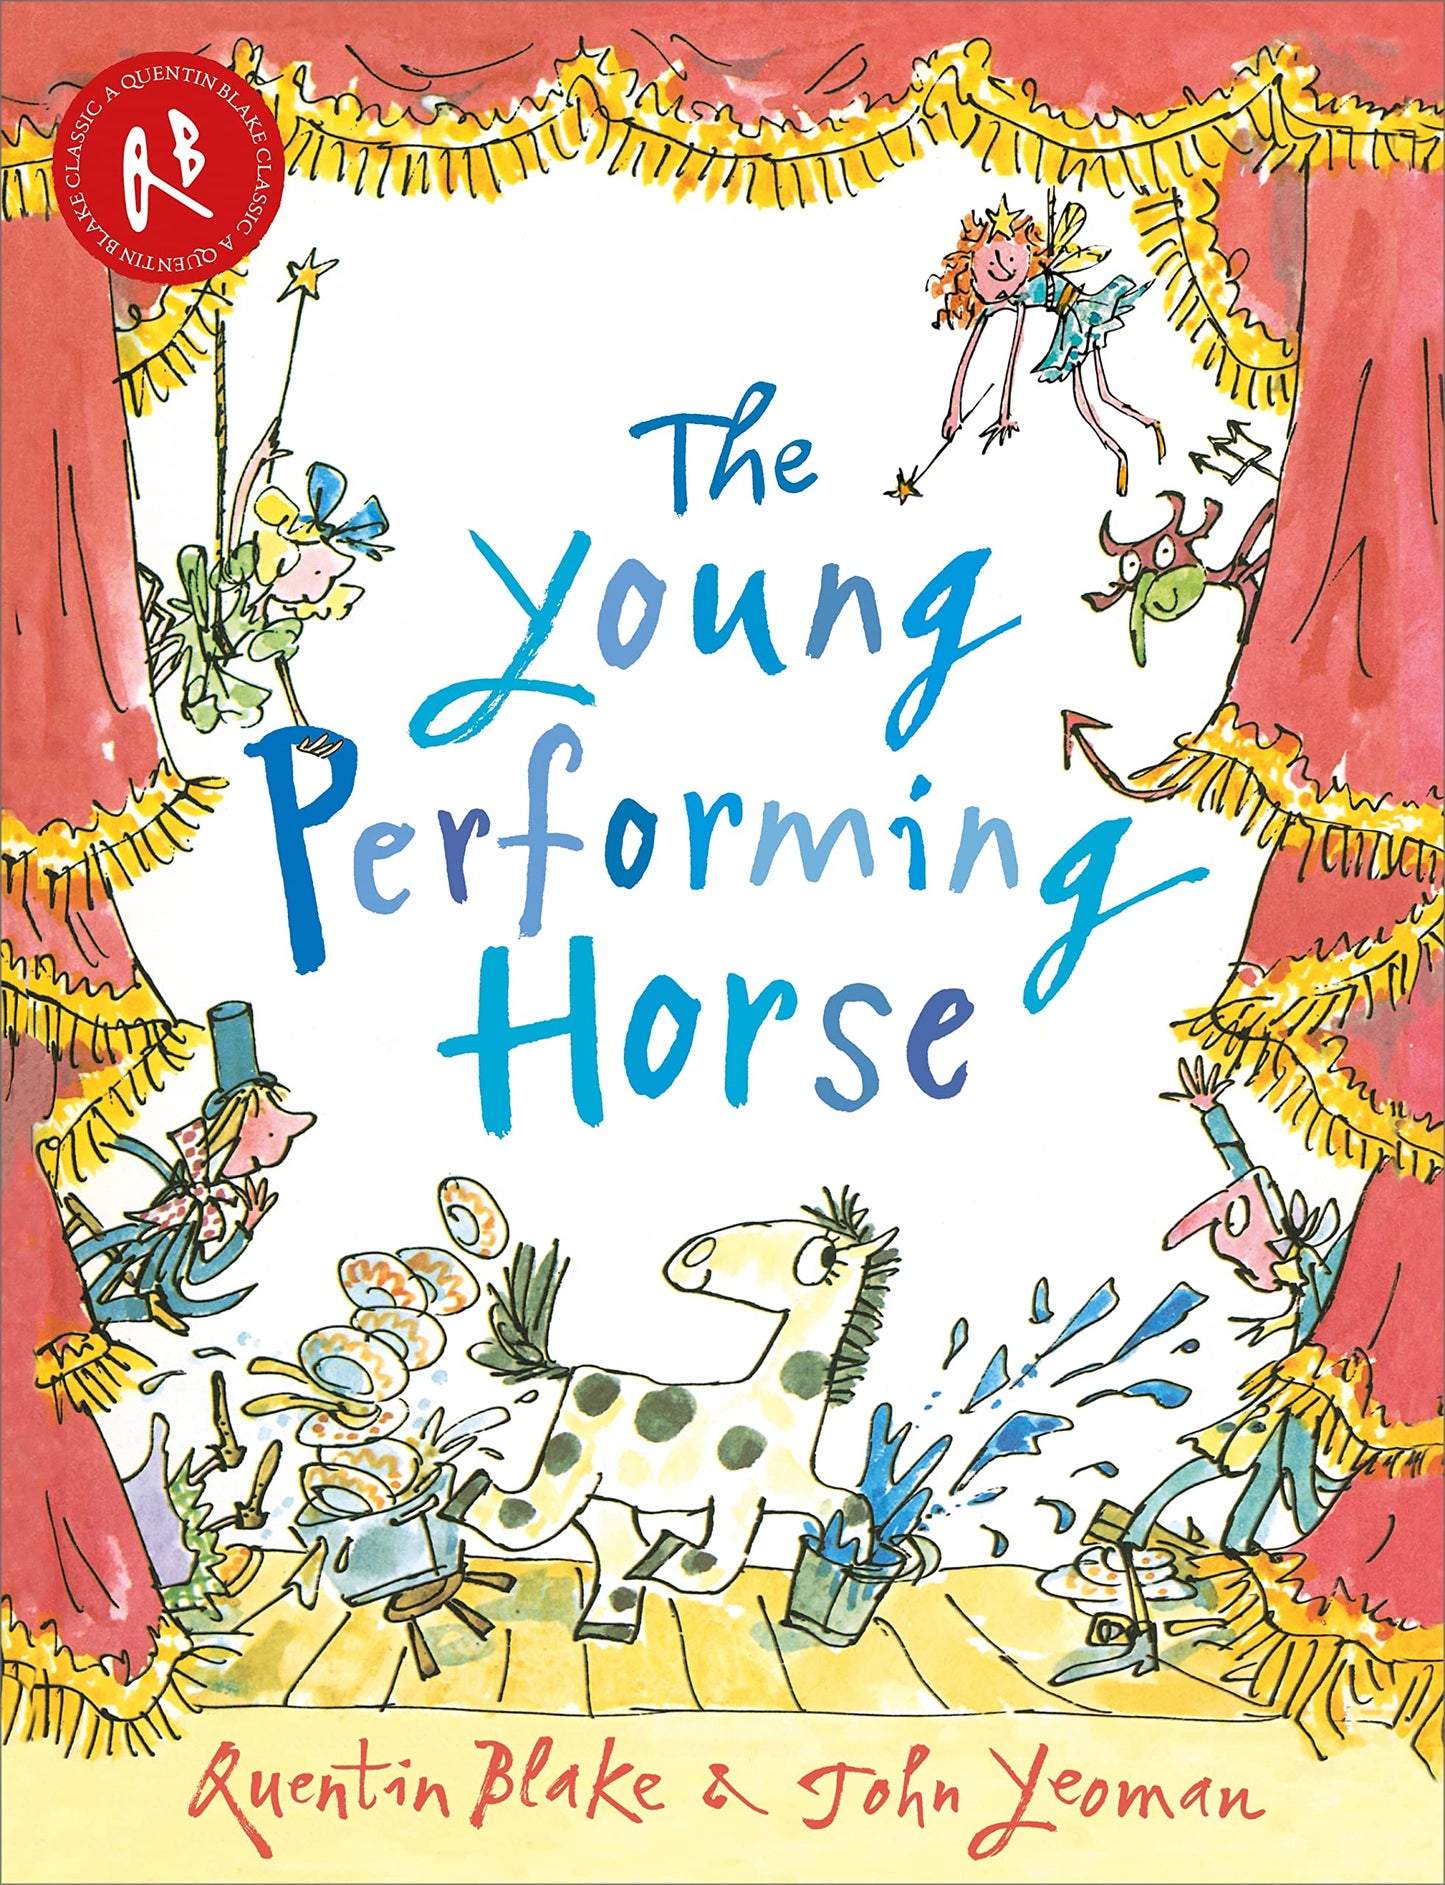 The Young Performing Horse by Quentin Blake & John Yeoman